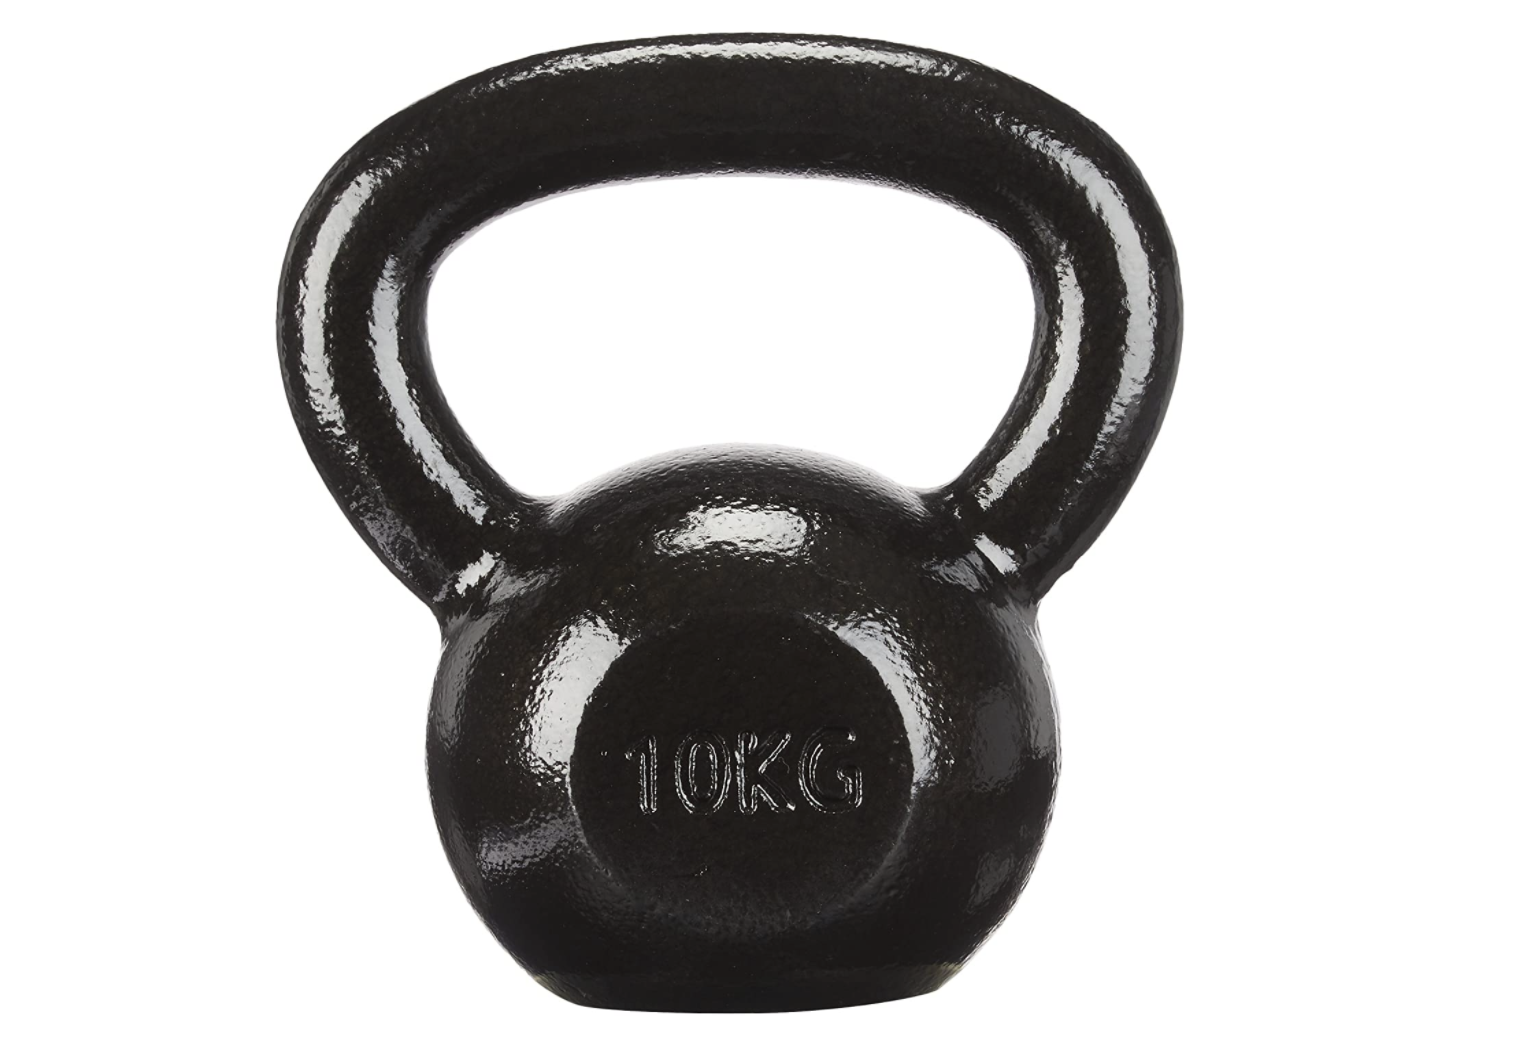 2/4/6/8KG Kettle Bells Vinyl Weights for Fitness Gym Home Workout 